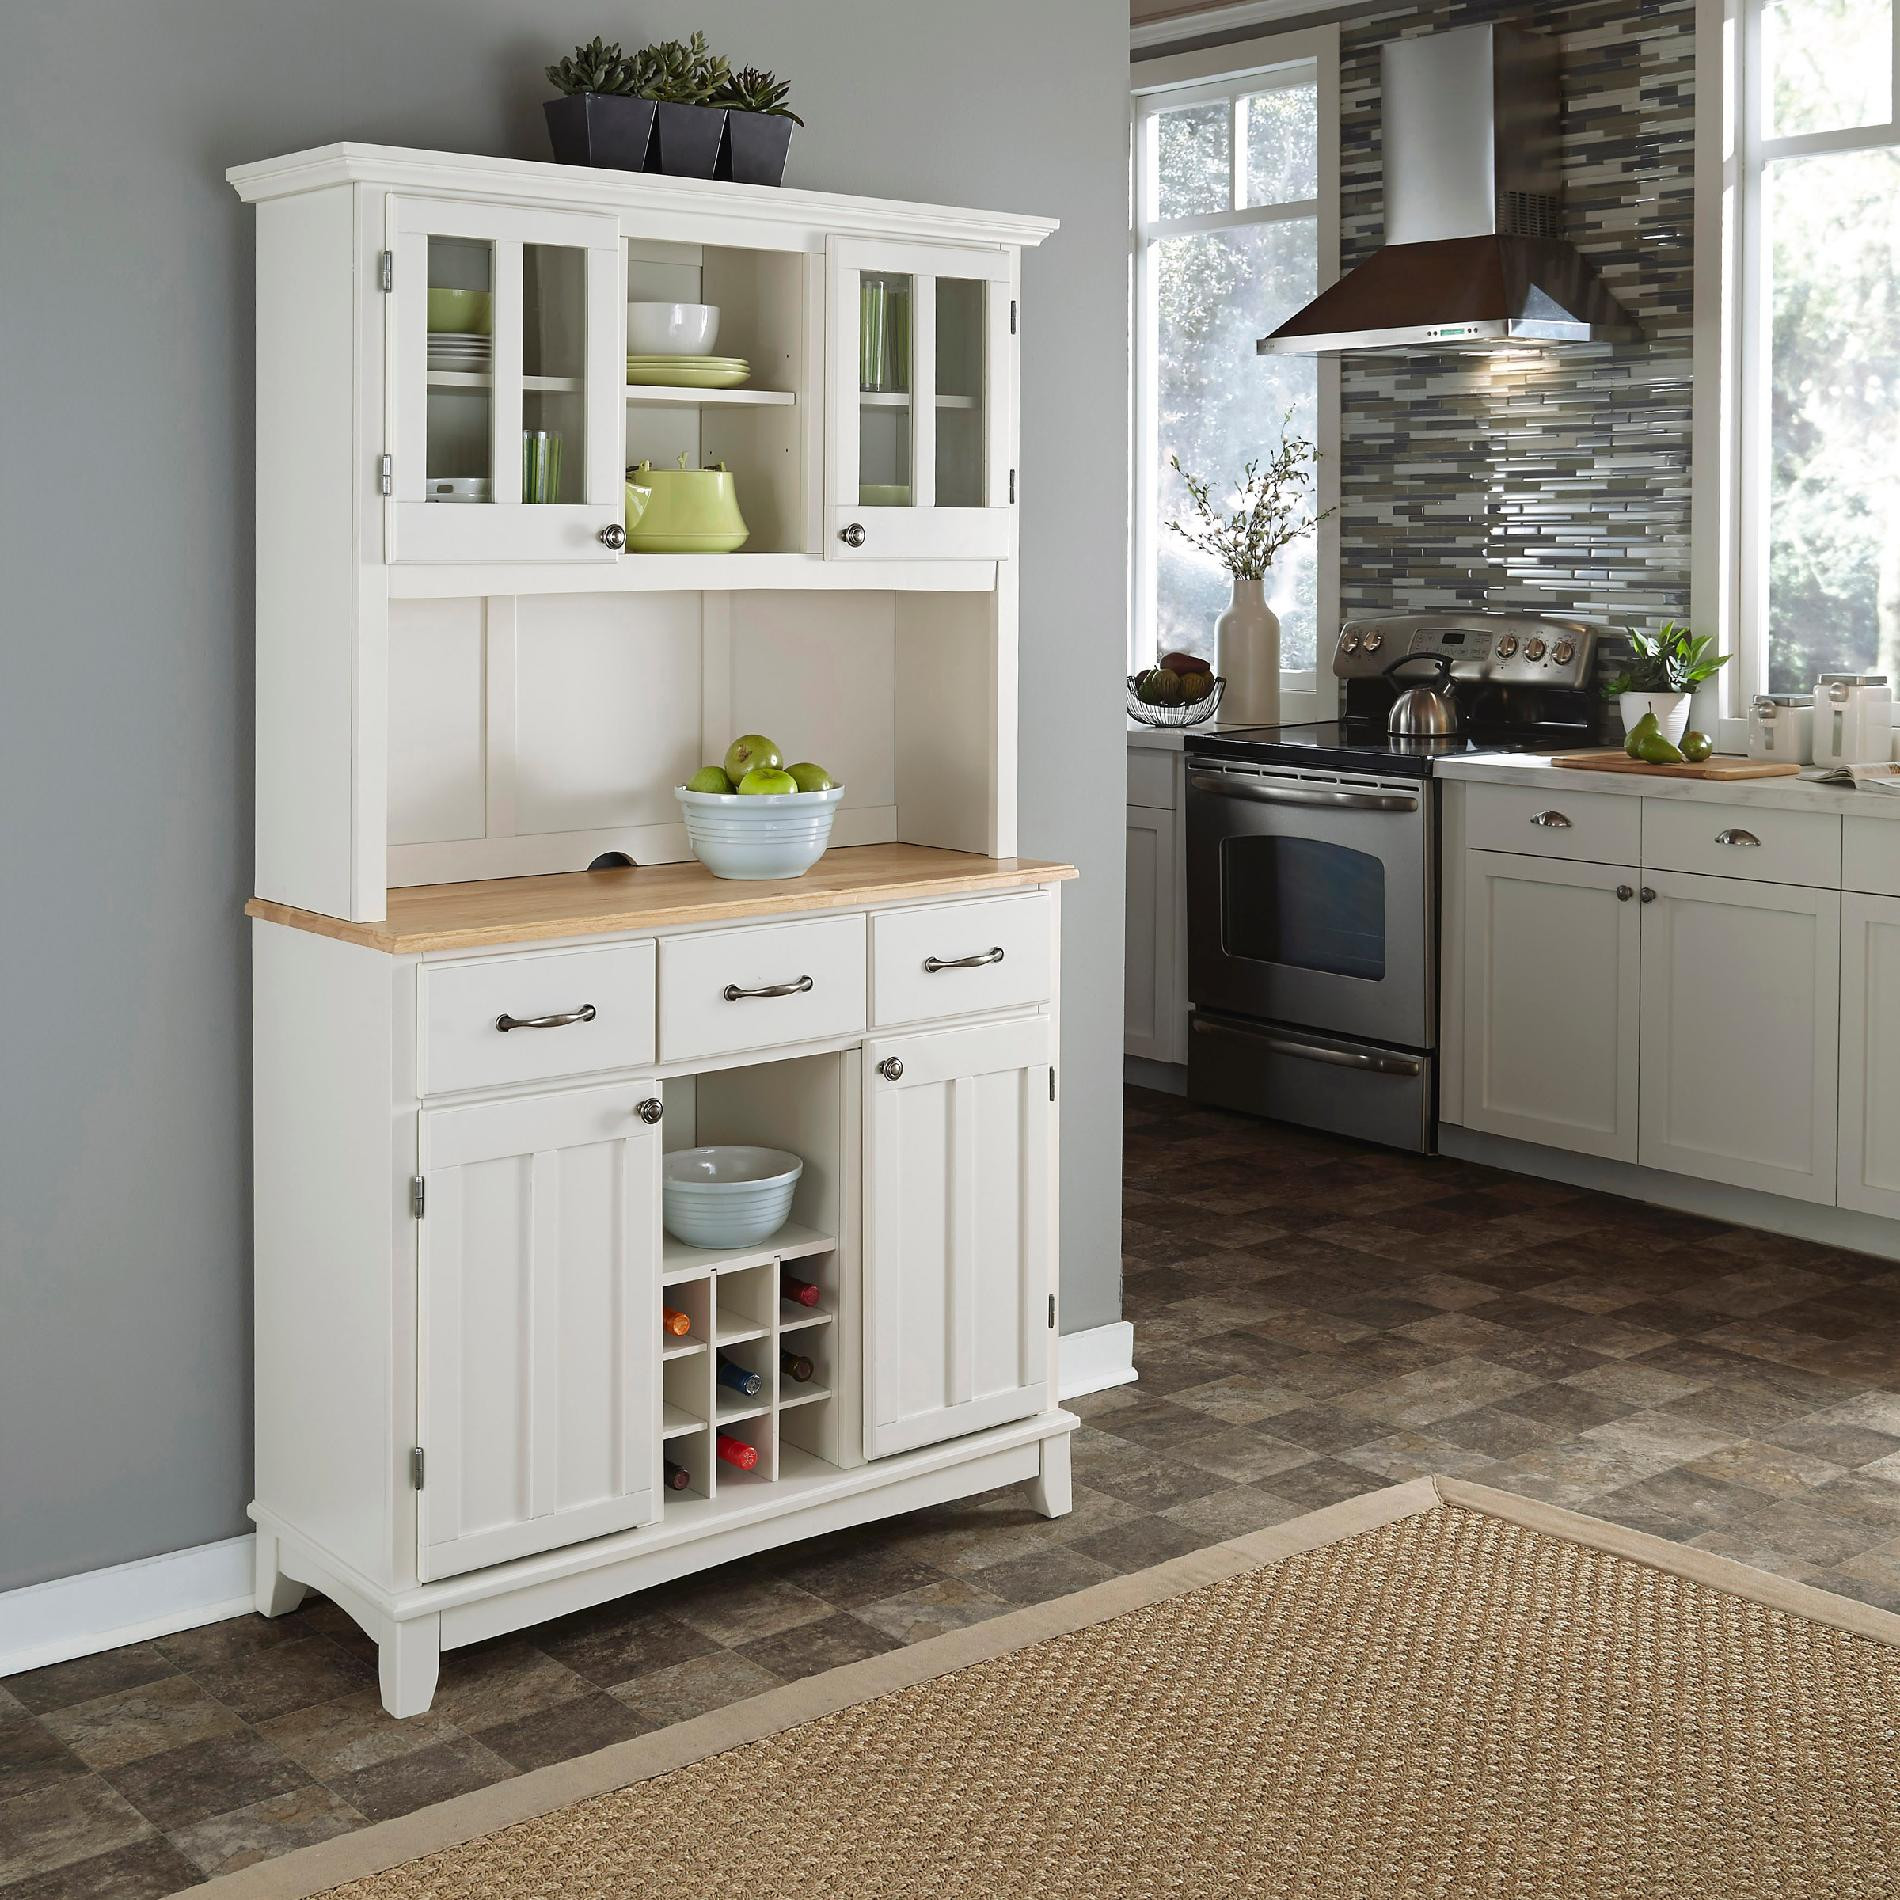 Kitchen Storage Hutch Awesome Home Styles Dining Room Buffet Hutch White Of Kitchen Storage Hutch 